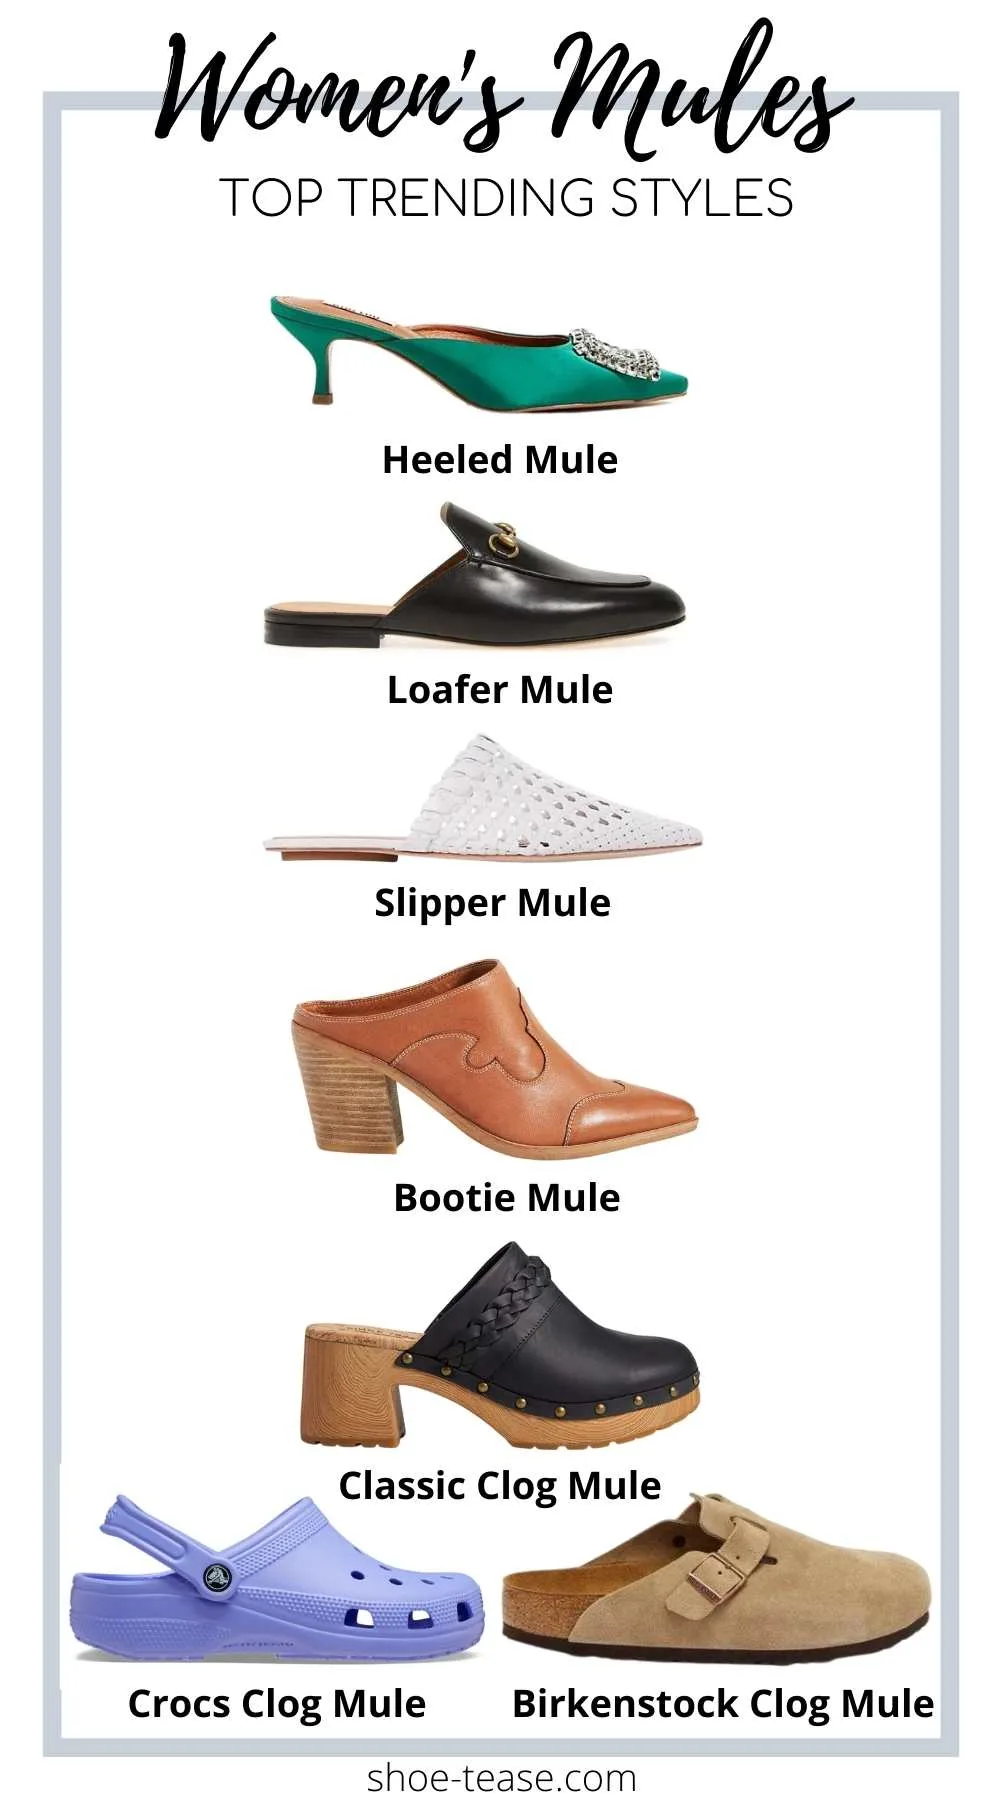 Collage of 7 different mule shoes for women.